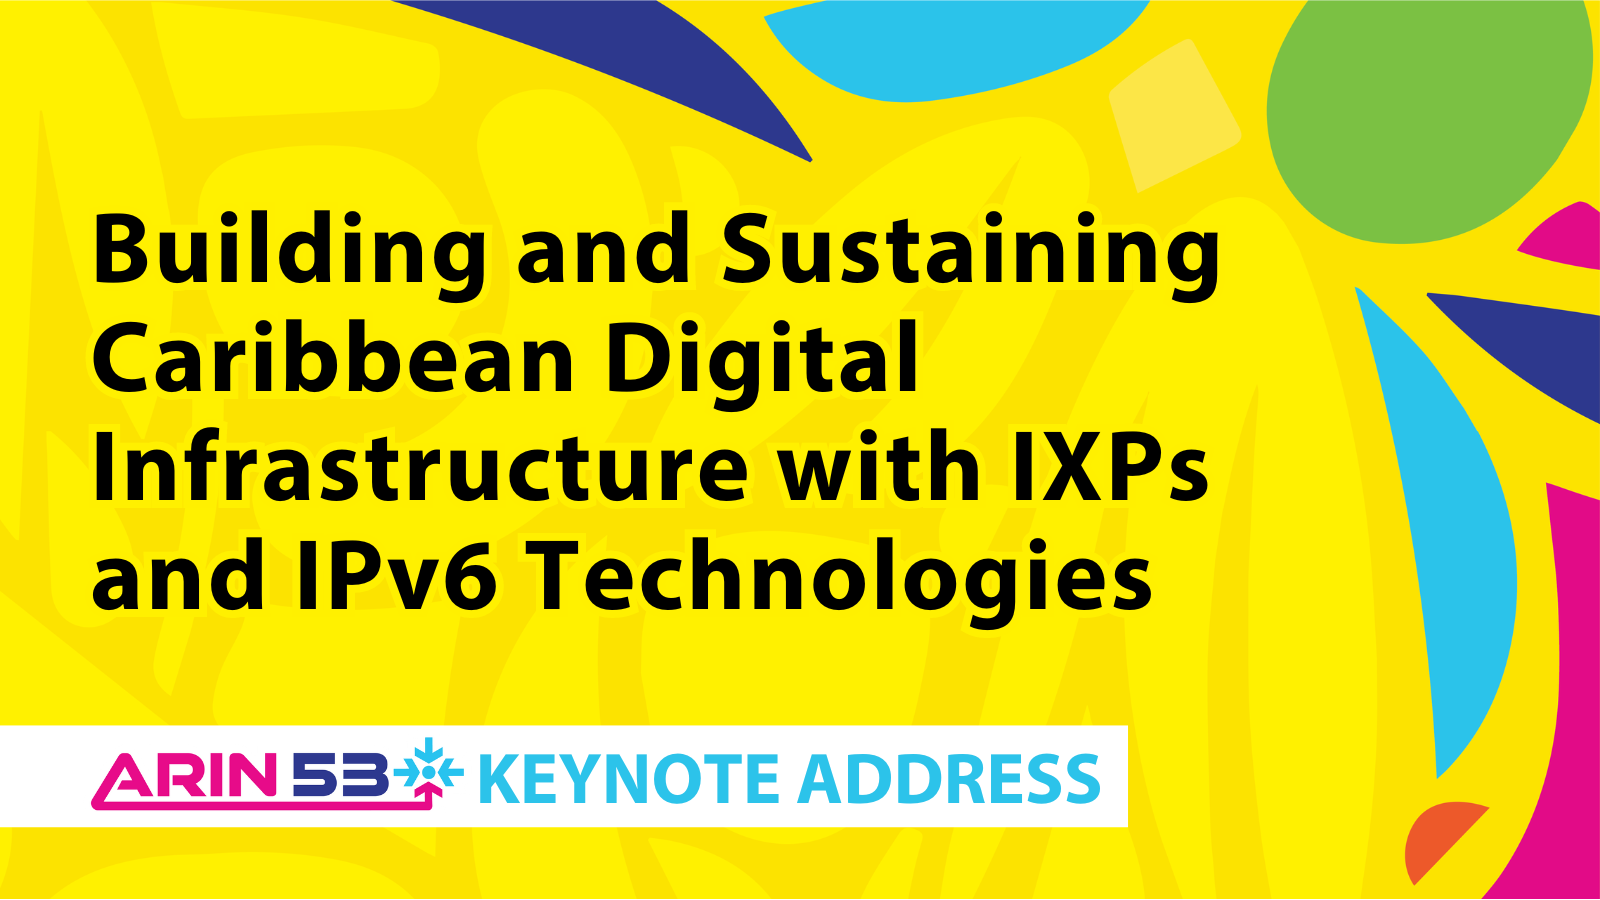 Building and Sustaining Caribbean Digital Infrastructure with IXPs and IPv6 Technologies